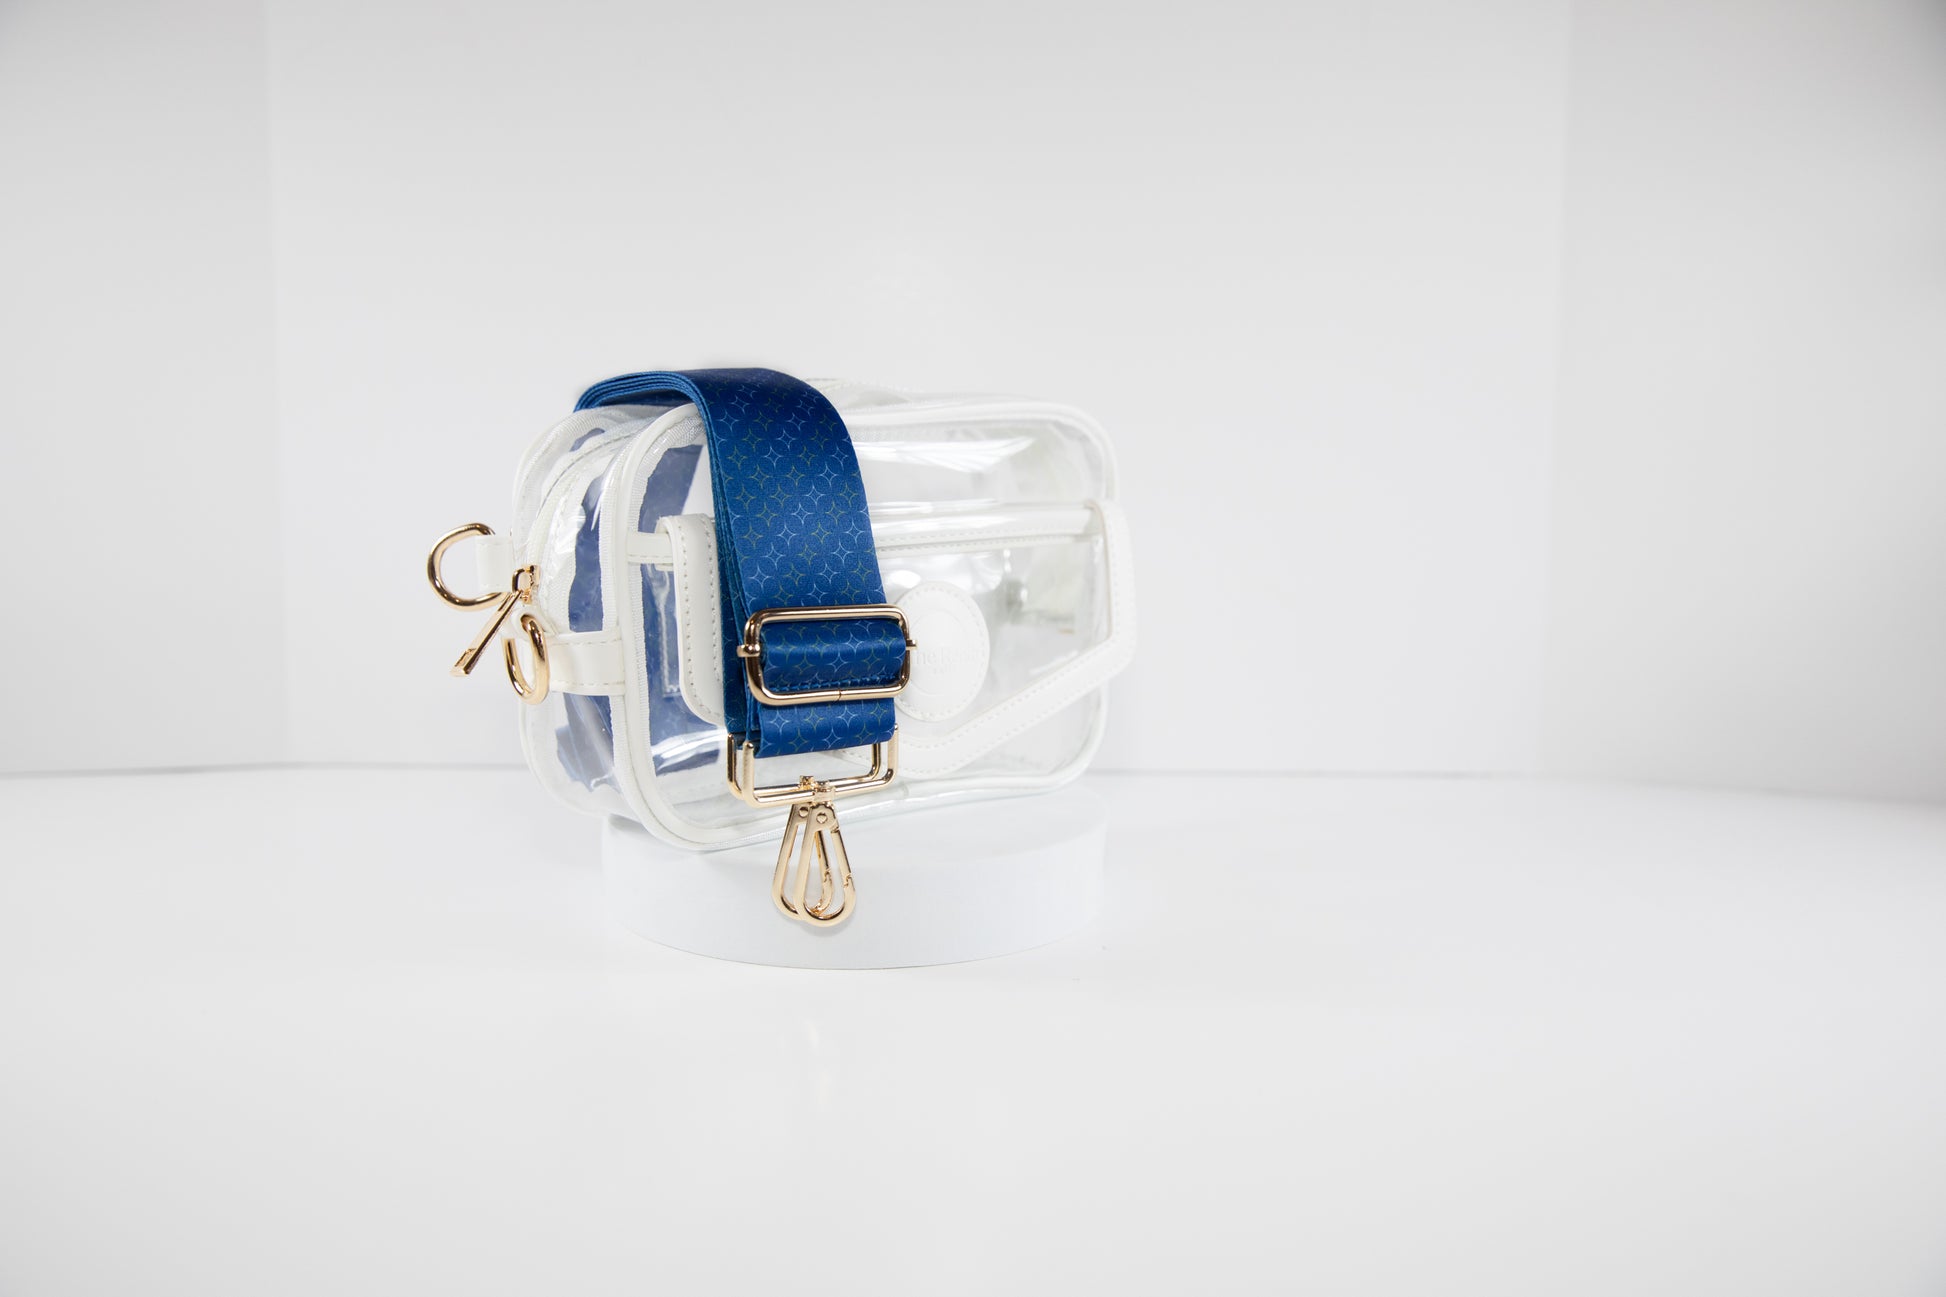 Clear stadium bag with white leather trim shown with a crossbody strap in Kansas City Royals team colors of navy and gold.